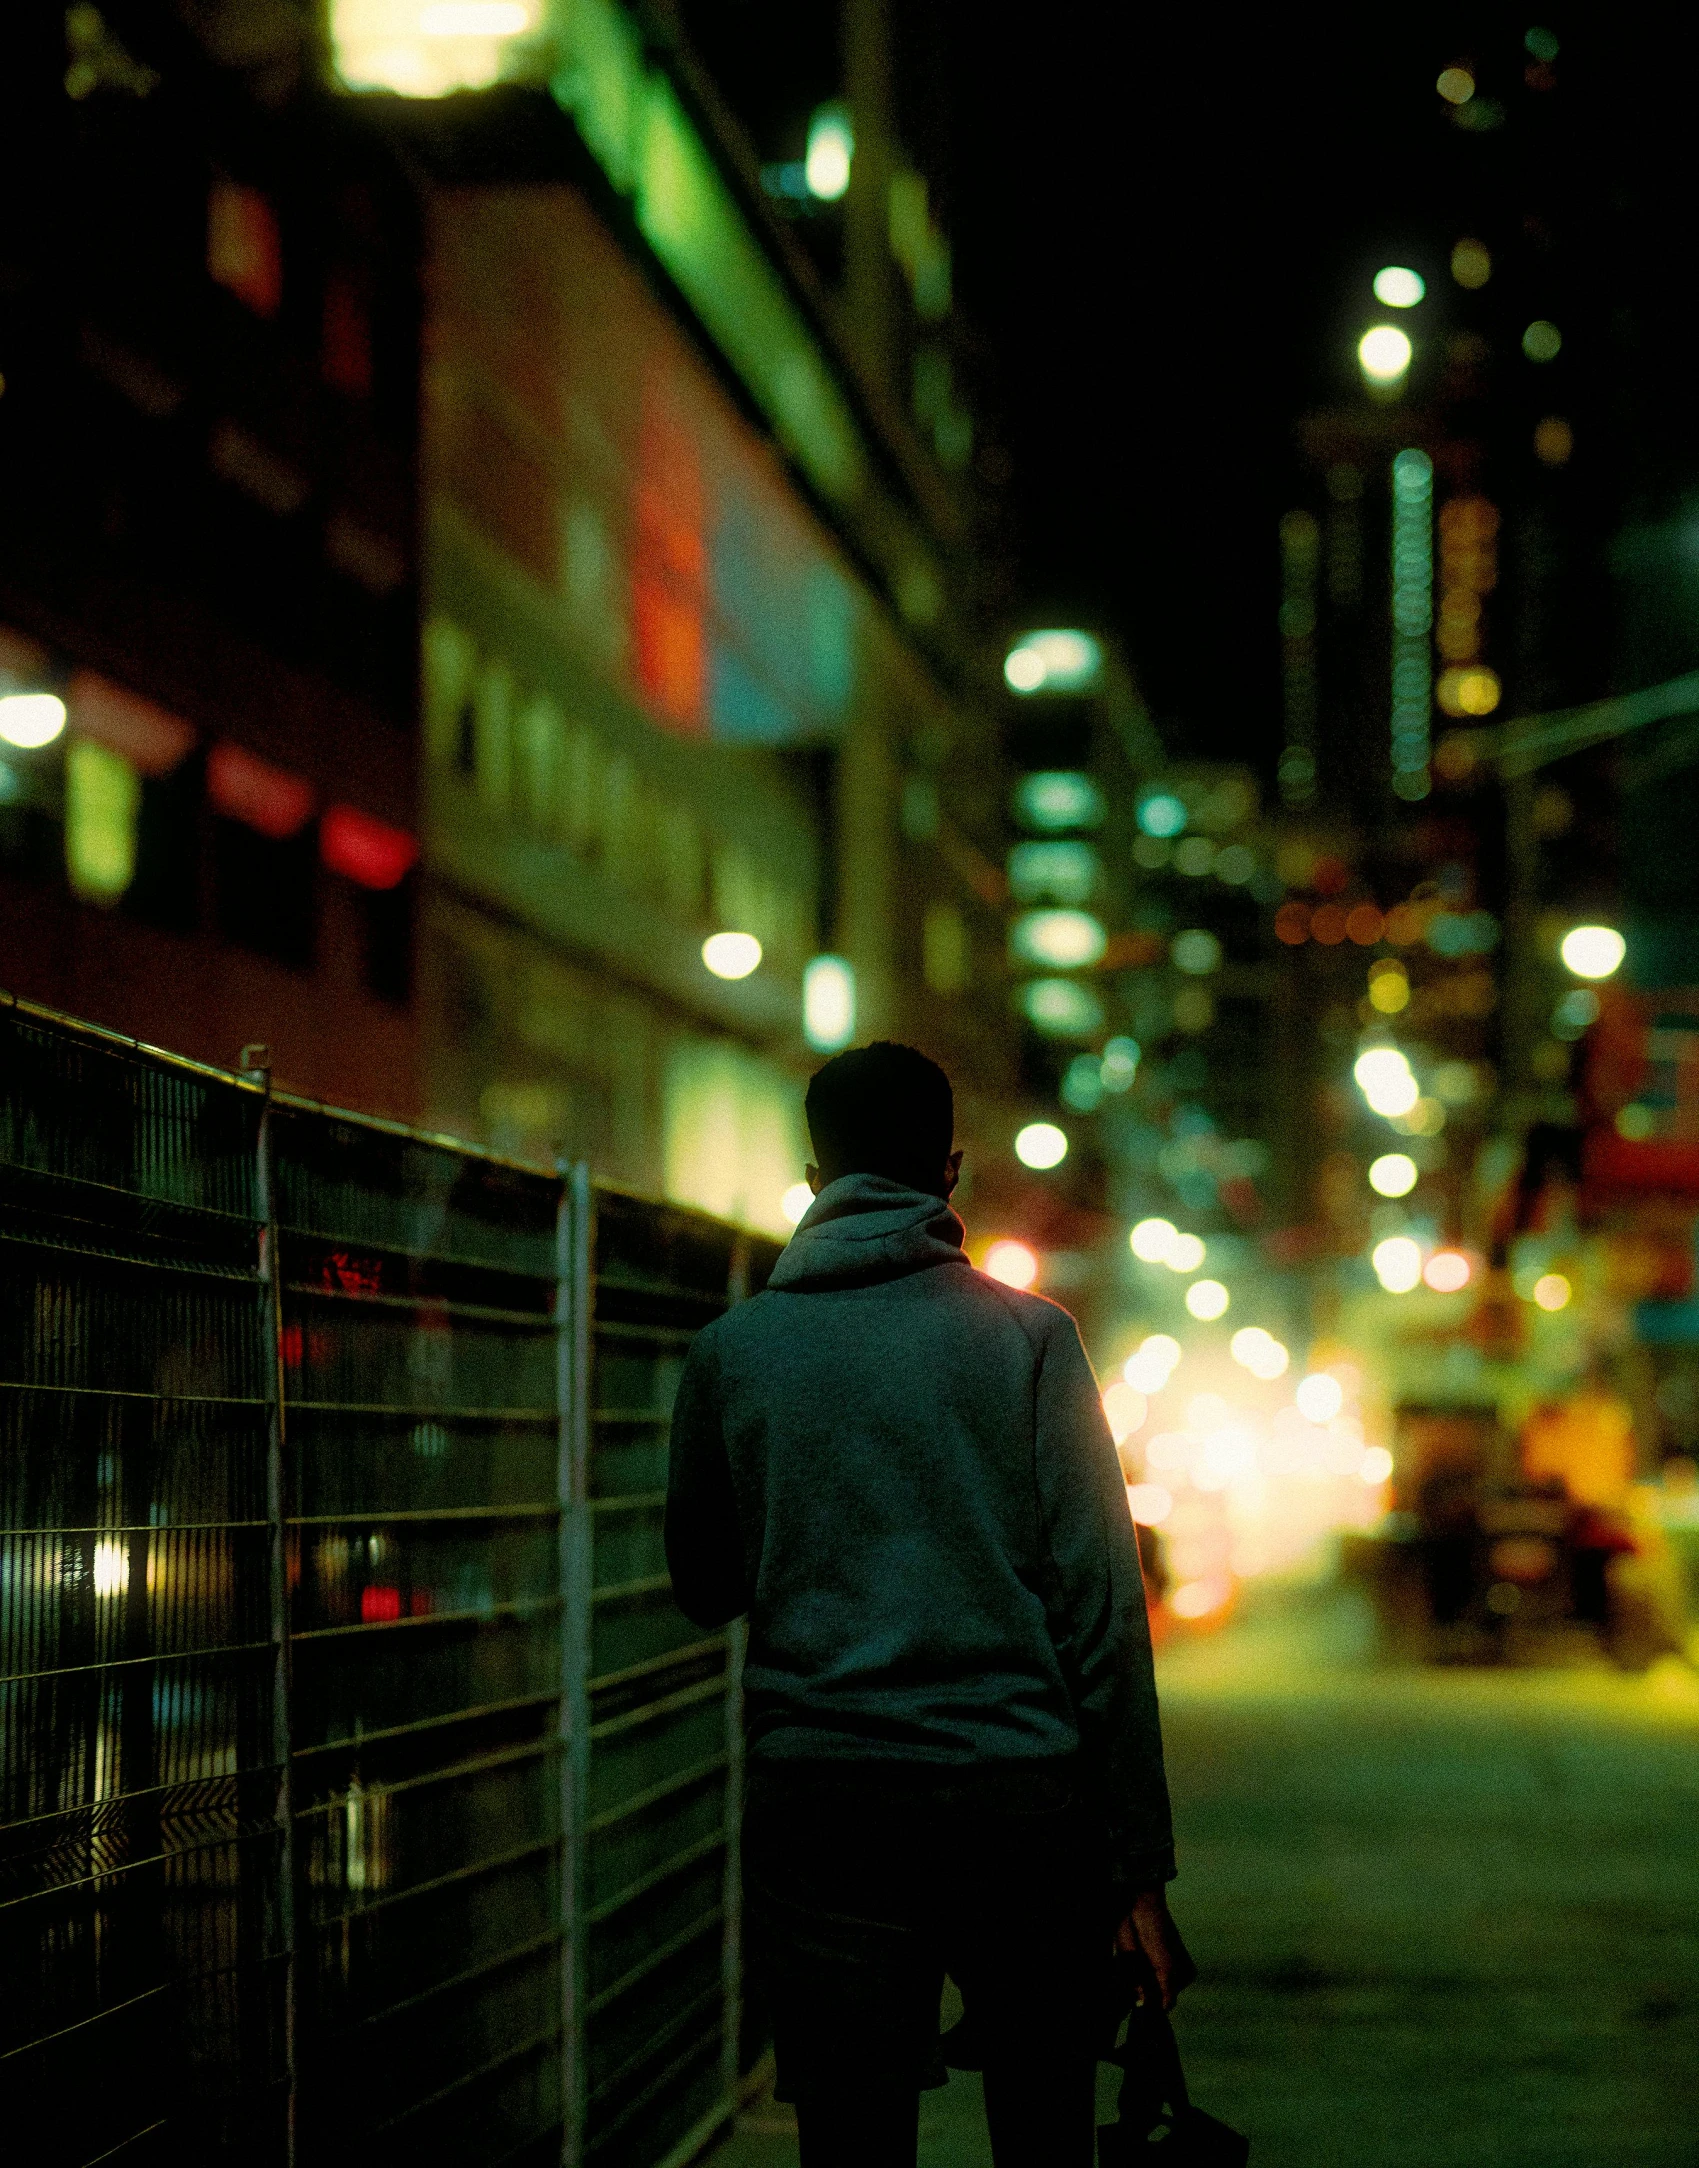 the back of a person walking in the city at night